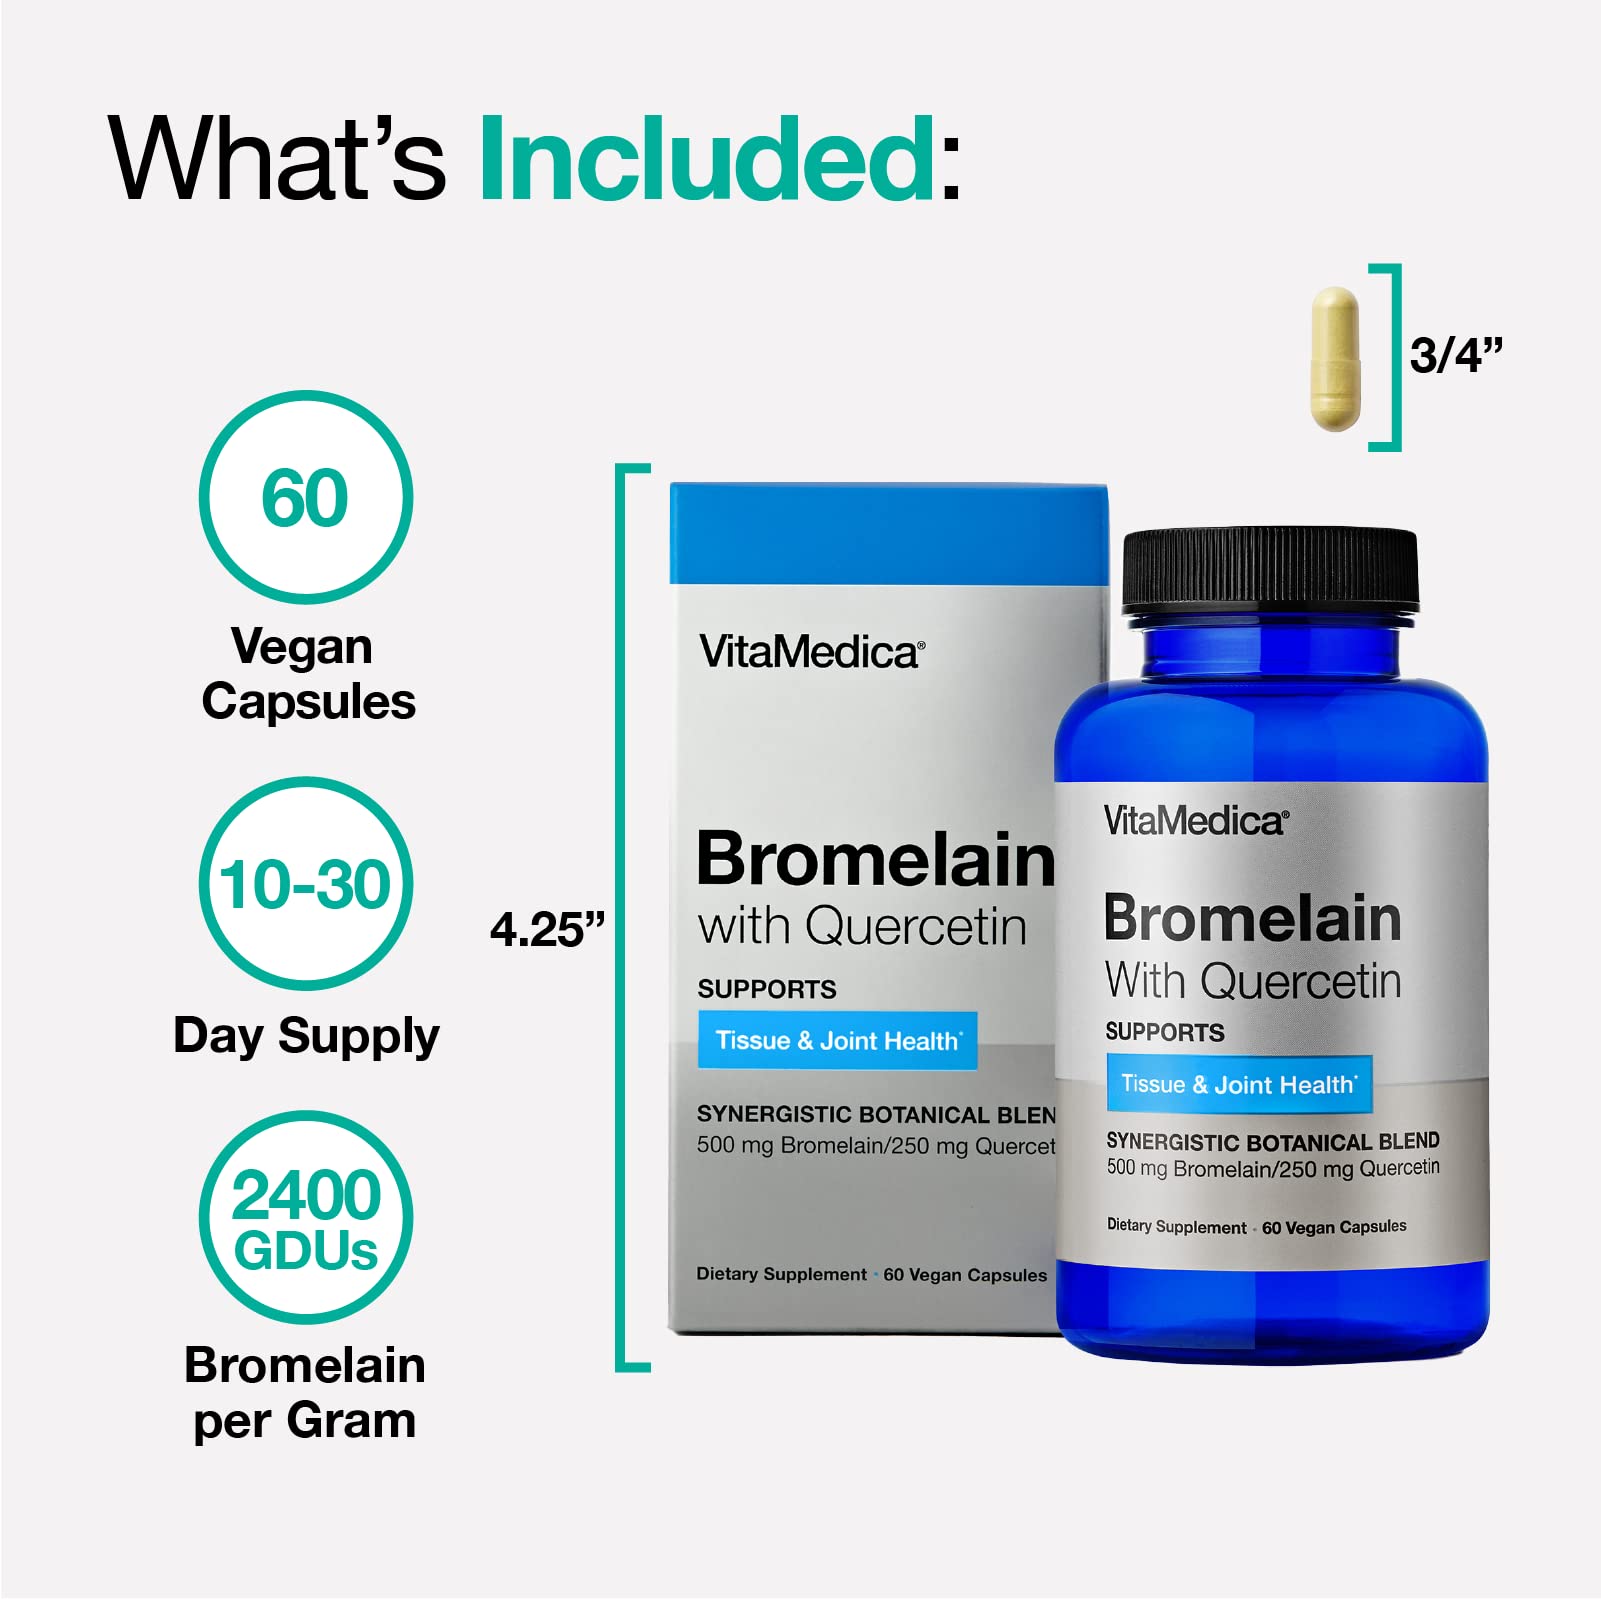 VitaMedica Arnica and Bromelain Bottles Bundle | for Post Surgery and Muscle Recovery | Bruise Relief | Plant Based Natural Formulas | 2 Product Bundle for Healing Support | 2 Week Supply